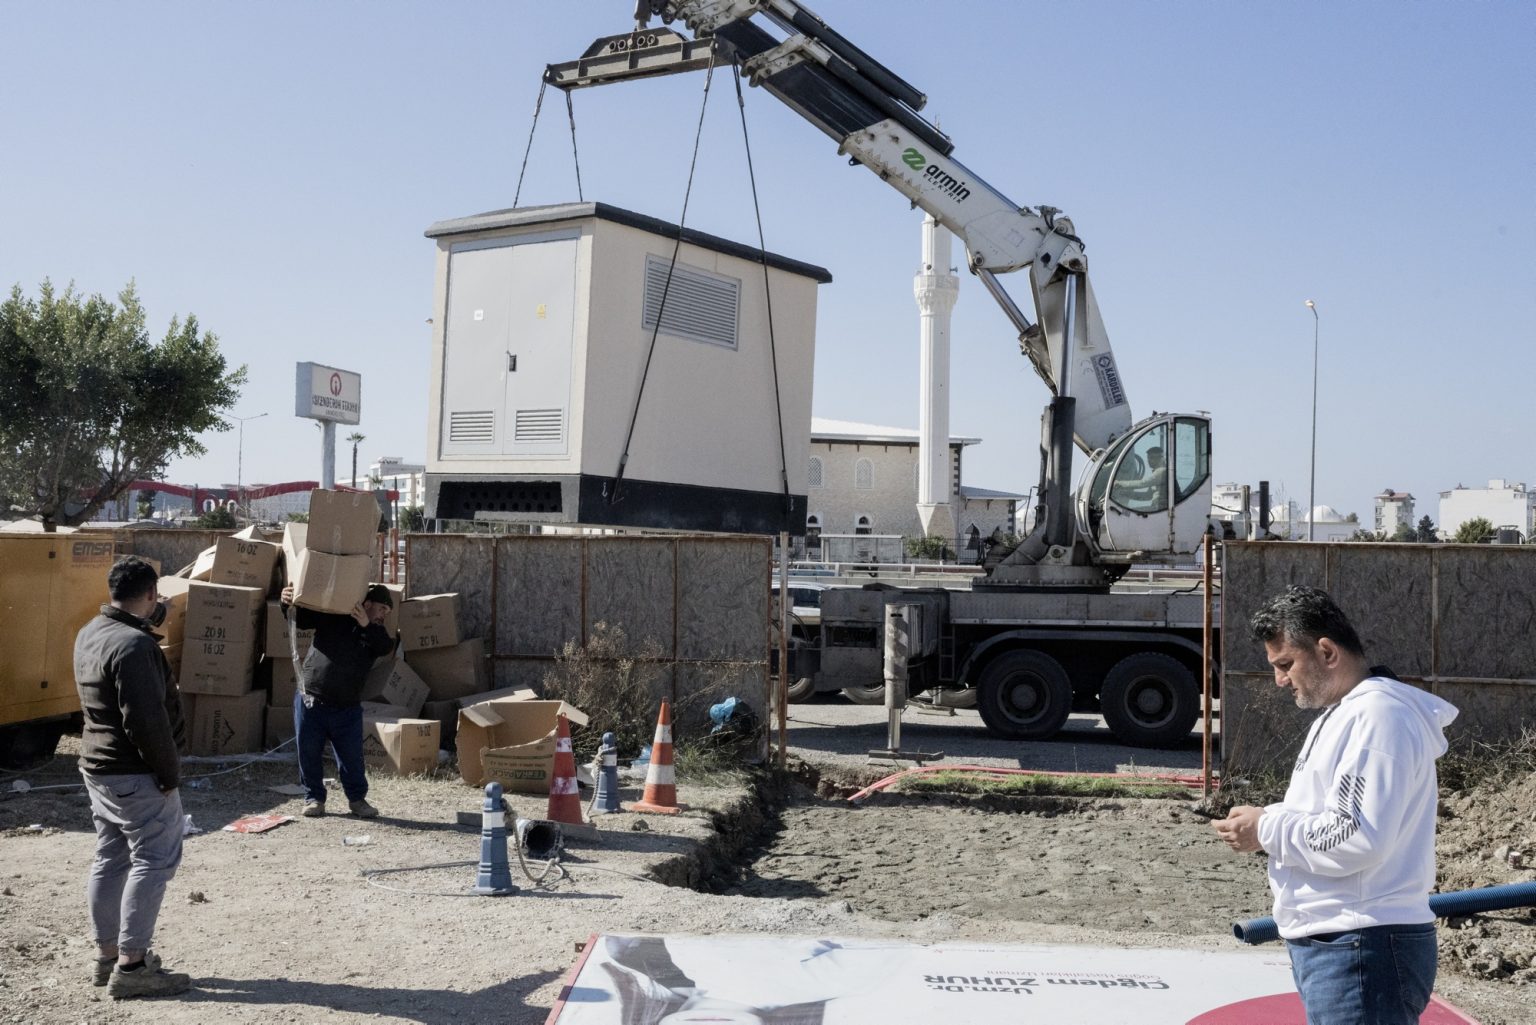 Iskenderun, Turkey, February 2023 - The aftermath of the earthquake that hit southern Turkey and northern Syria. Work to finish a container camp set up in the city of Iskenderun.><
Iskenderun, Turchia, febbraio 2023  Le conseguenze del terremoto che ha colpito la Turchia del Sud e la Siria del nord.